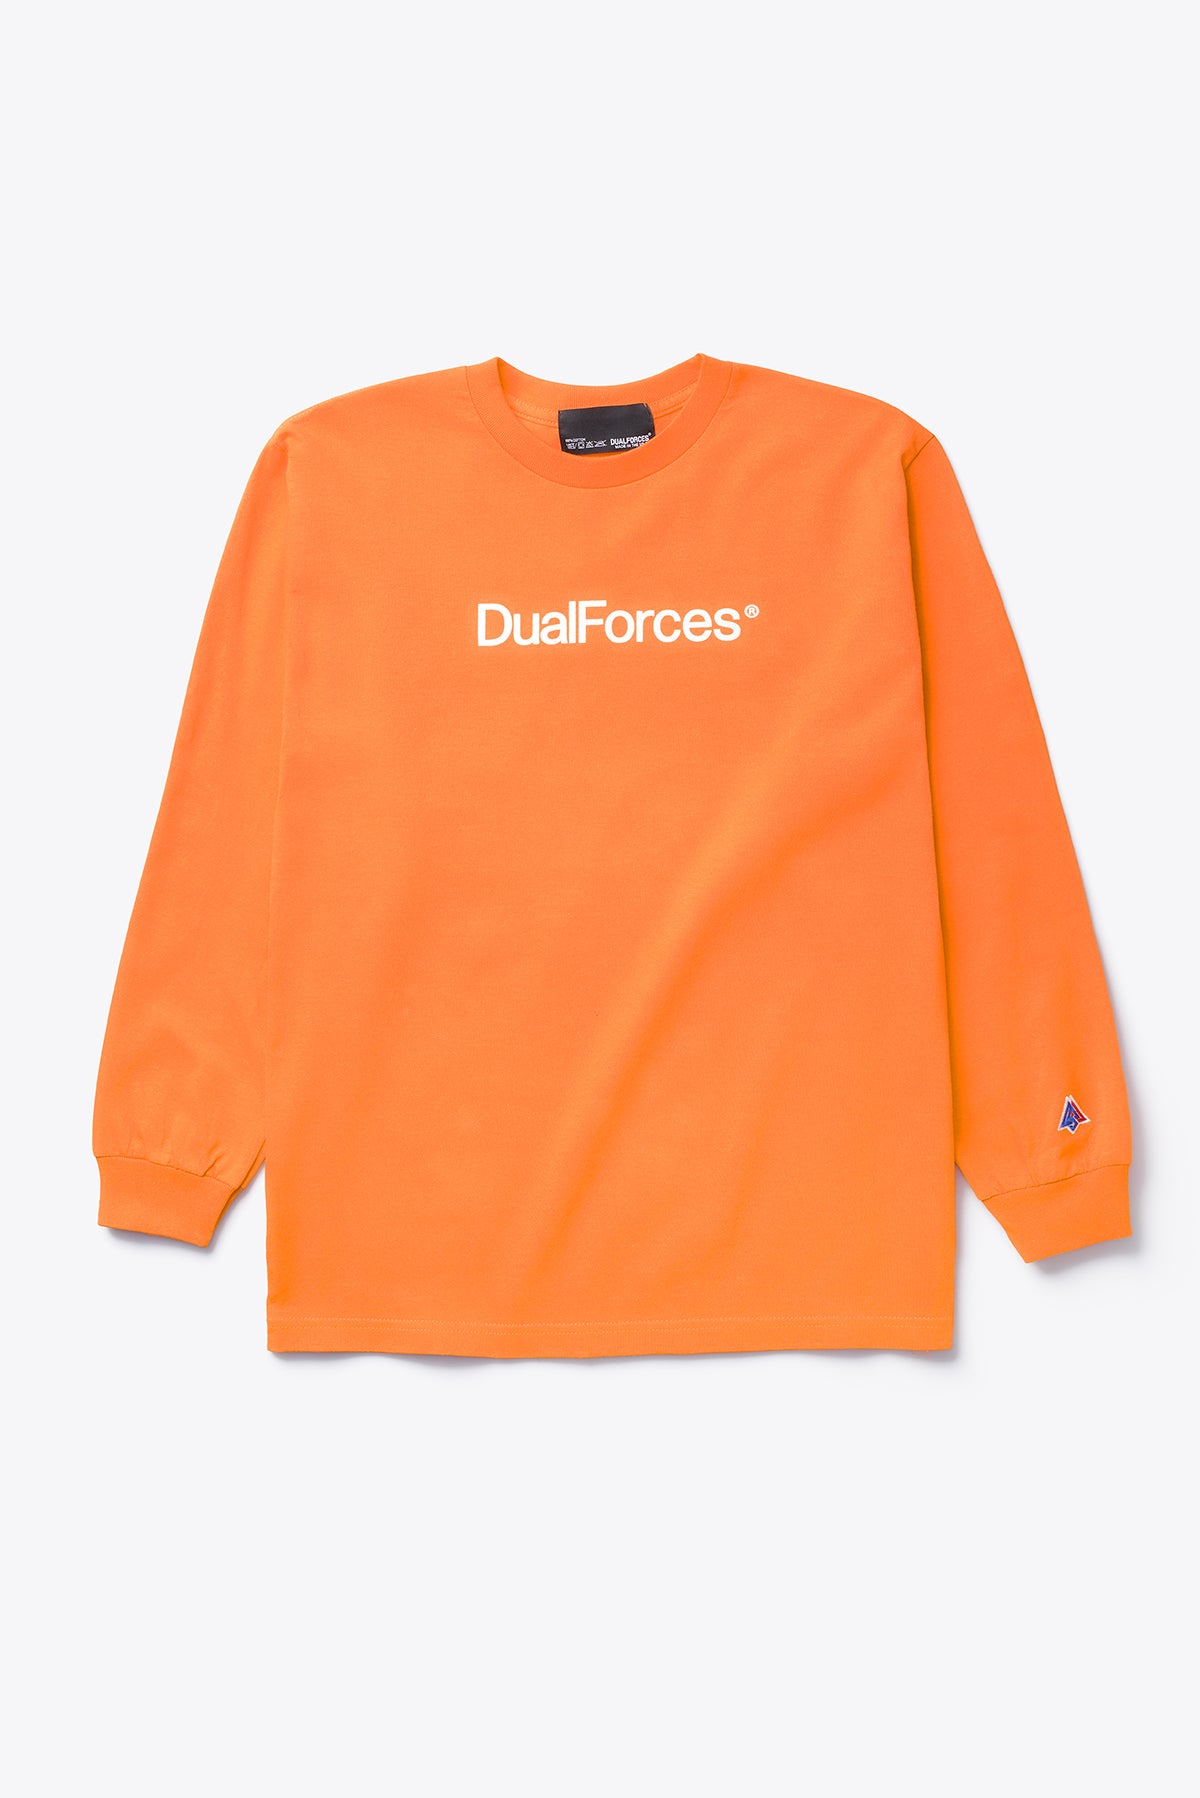 Orange Long-sleeved t-shirt is printed with our DualForces team logo on front and DualForces mark on the sleeve.  Printed Team Logo   Woven Brand Label   Made in USA 